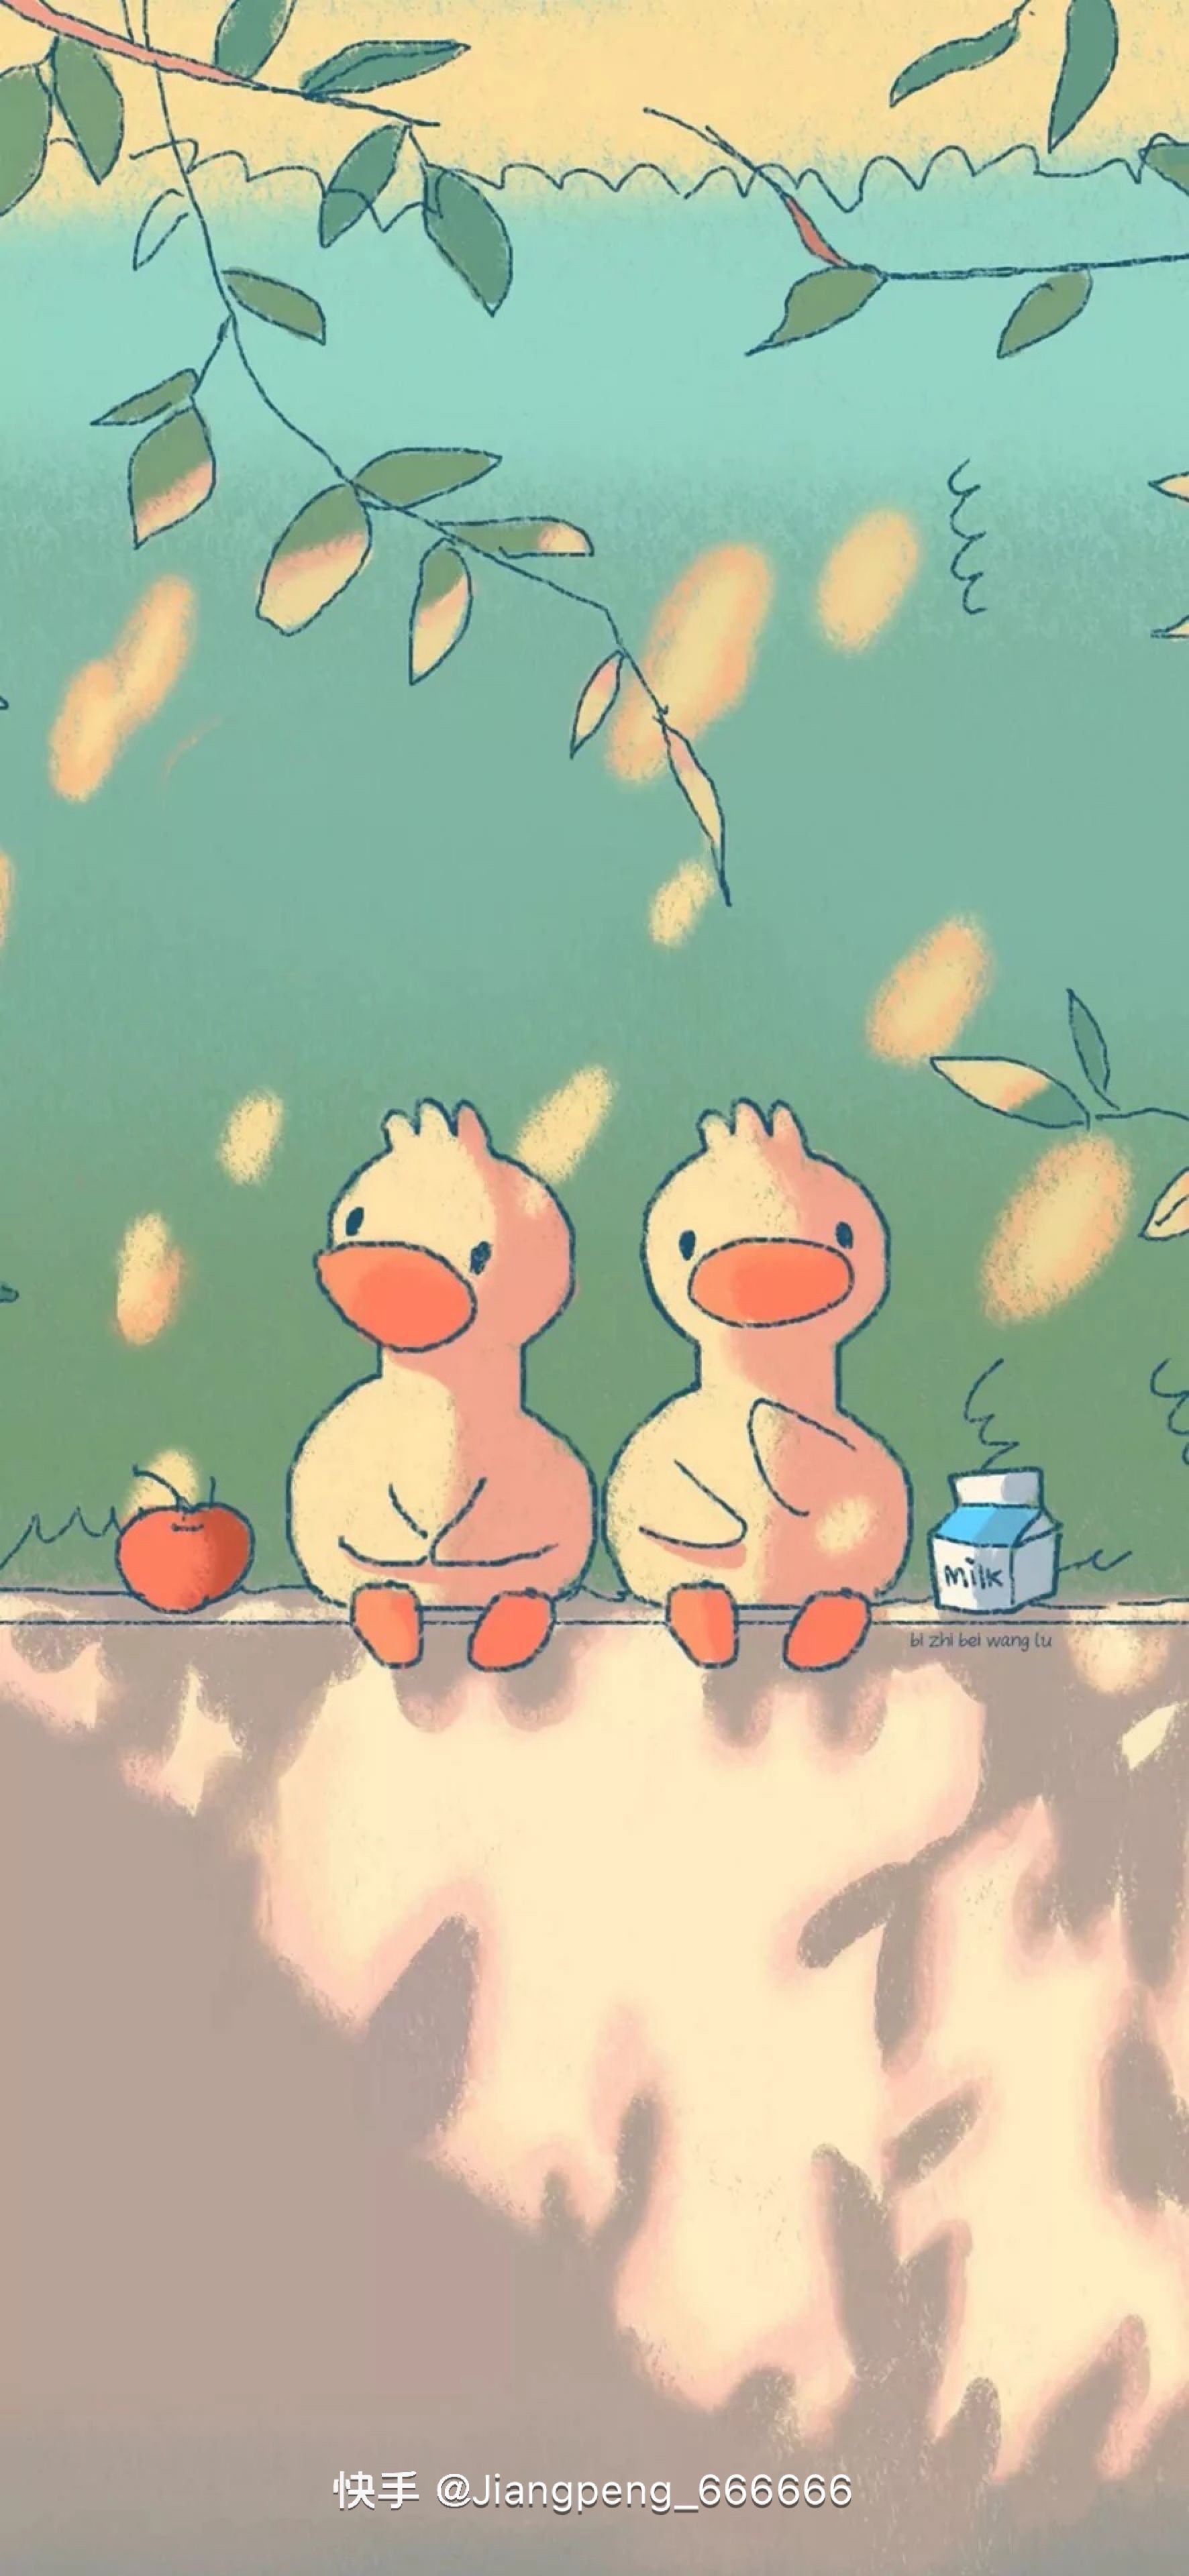 A cute wallpaper of two ducks sitting on a log with apples and milk. - Duck